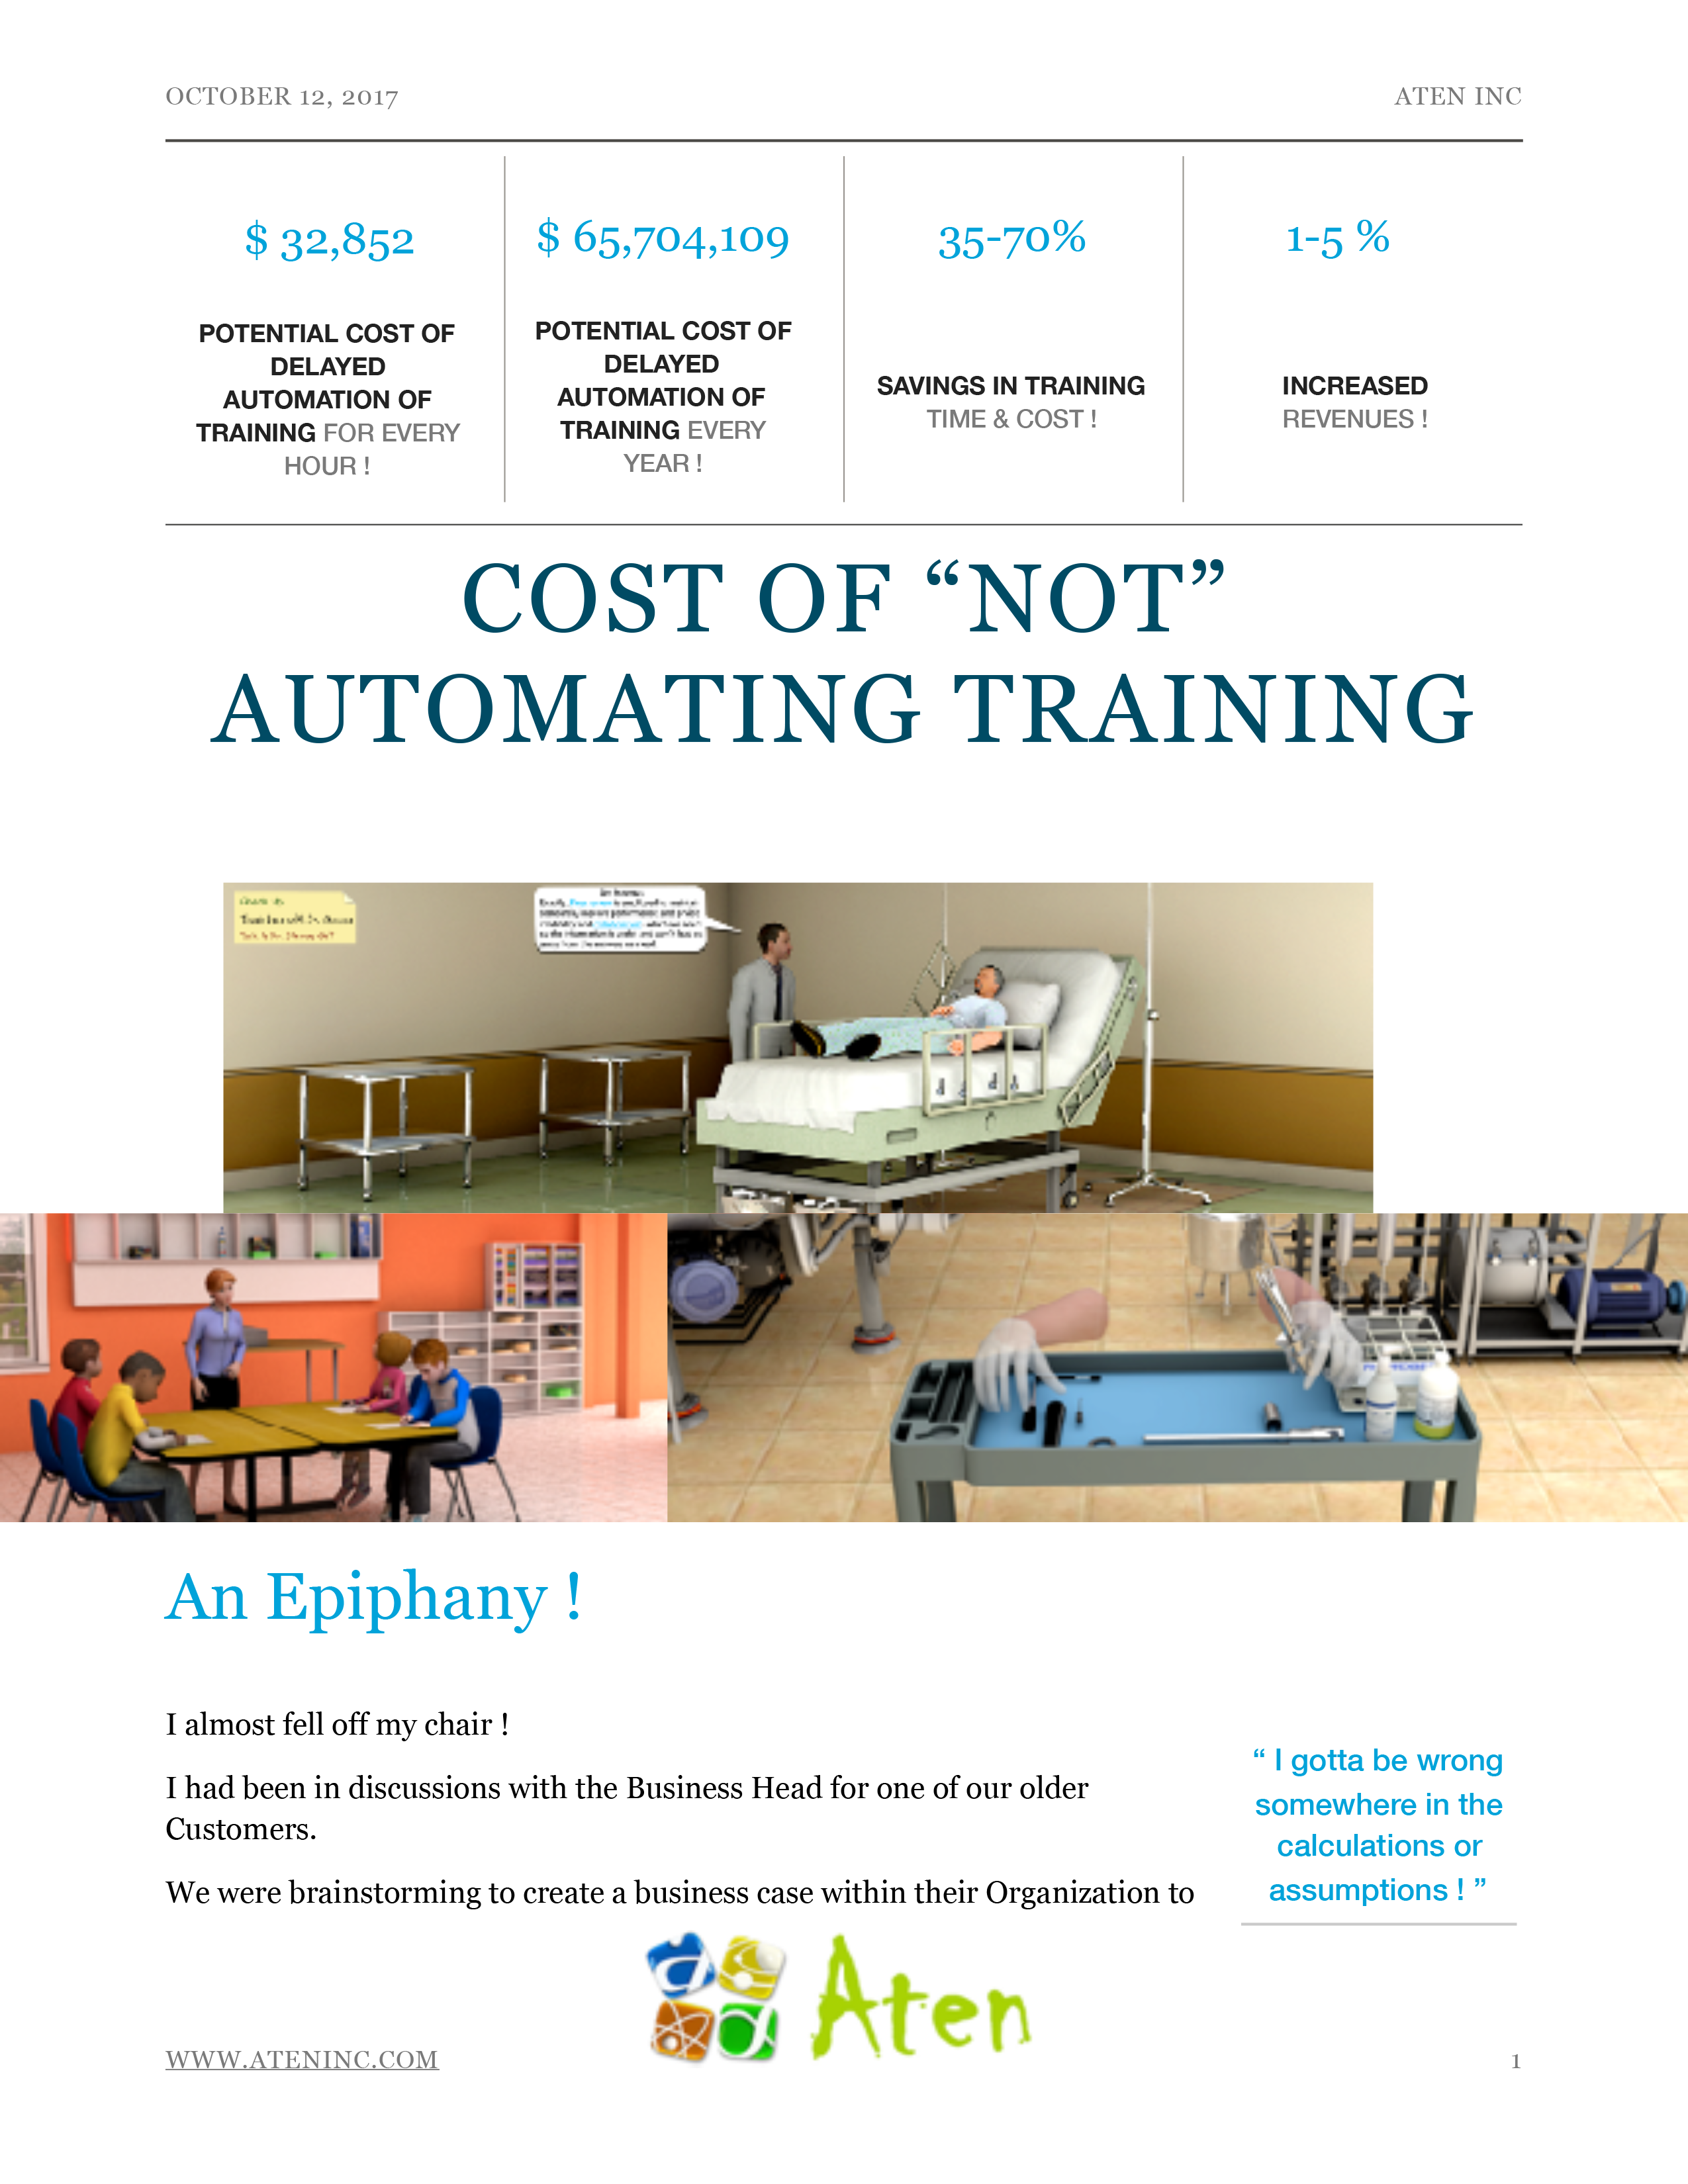 Cost Of Not Automating Innovating Training